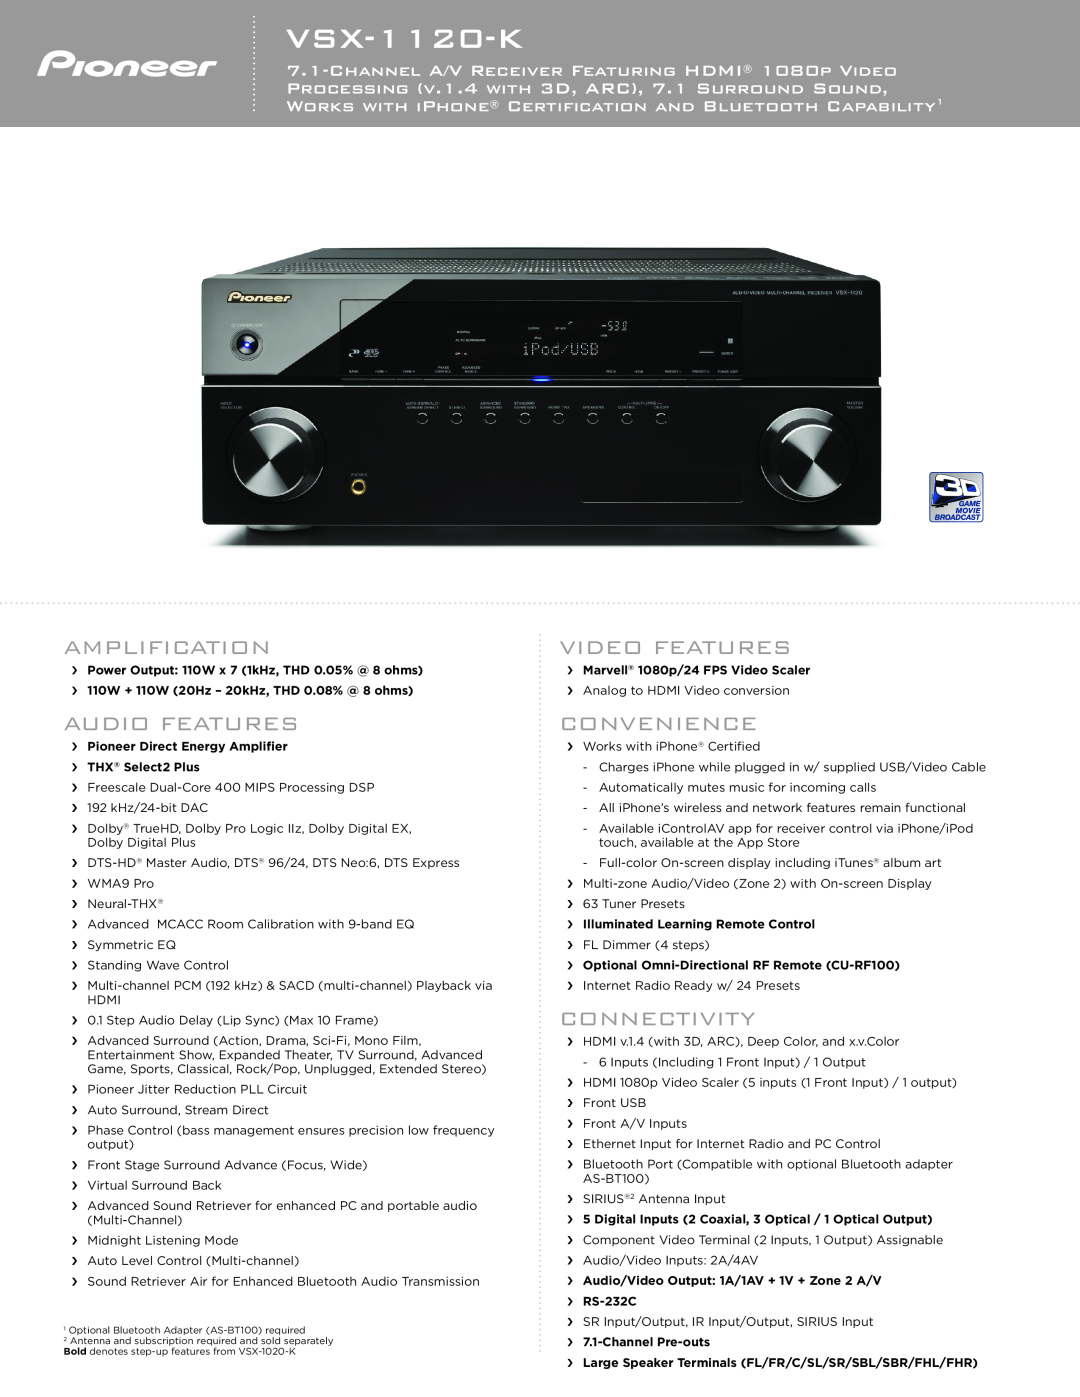 Pioneer VSX-1120-K manual Amplification, Audio Features, Video Features, Convenience, Connectivity 